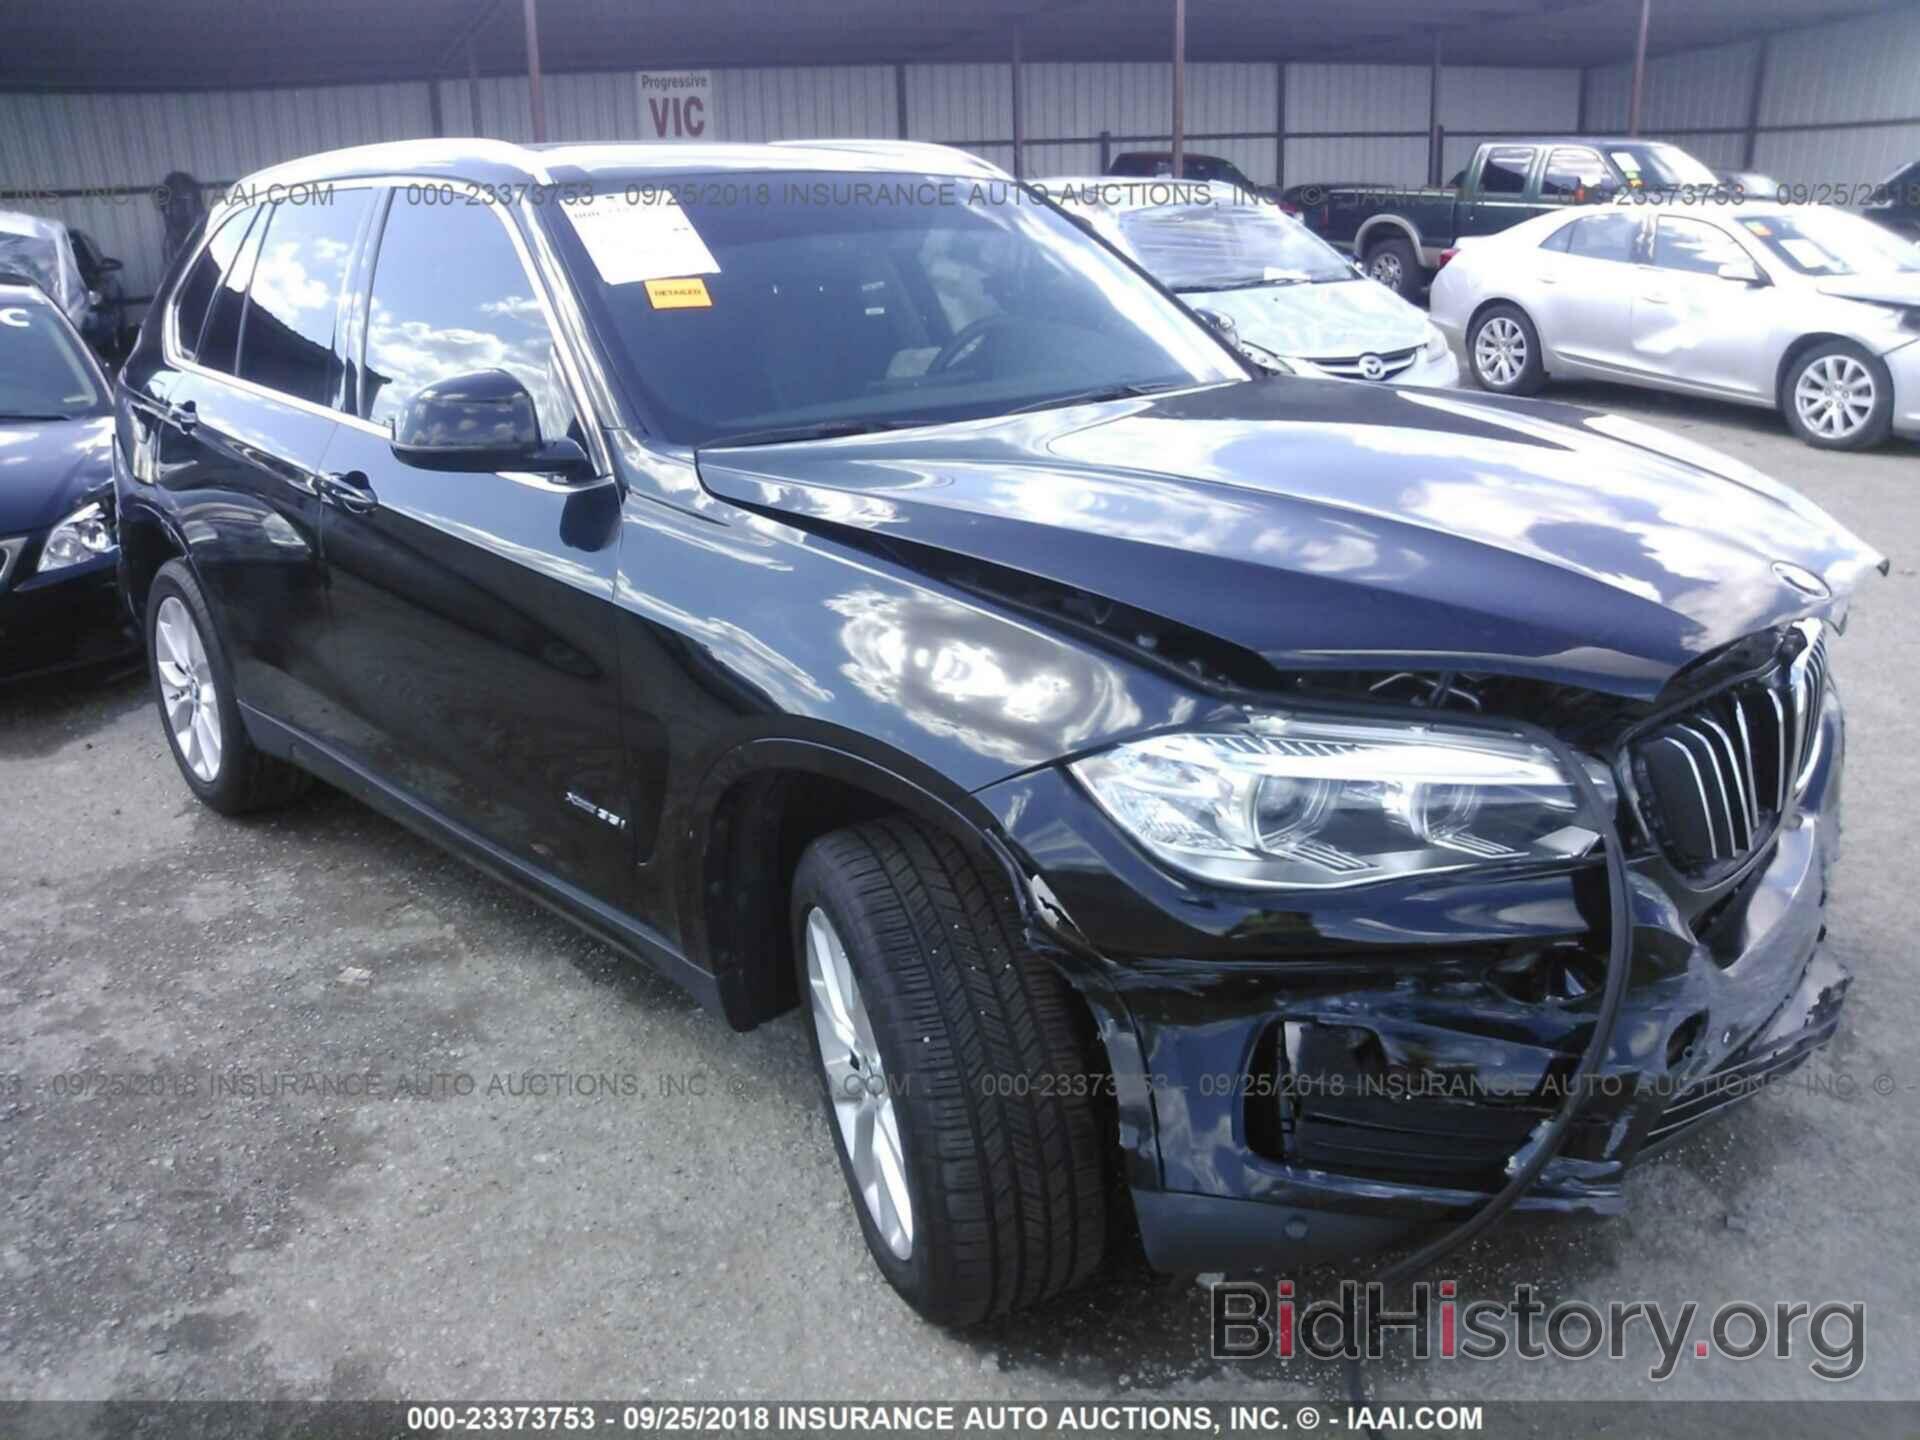 Photo 5UXKR0C5XE0H22350 - Bmw X5 2014